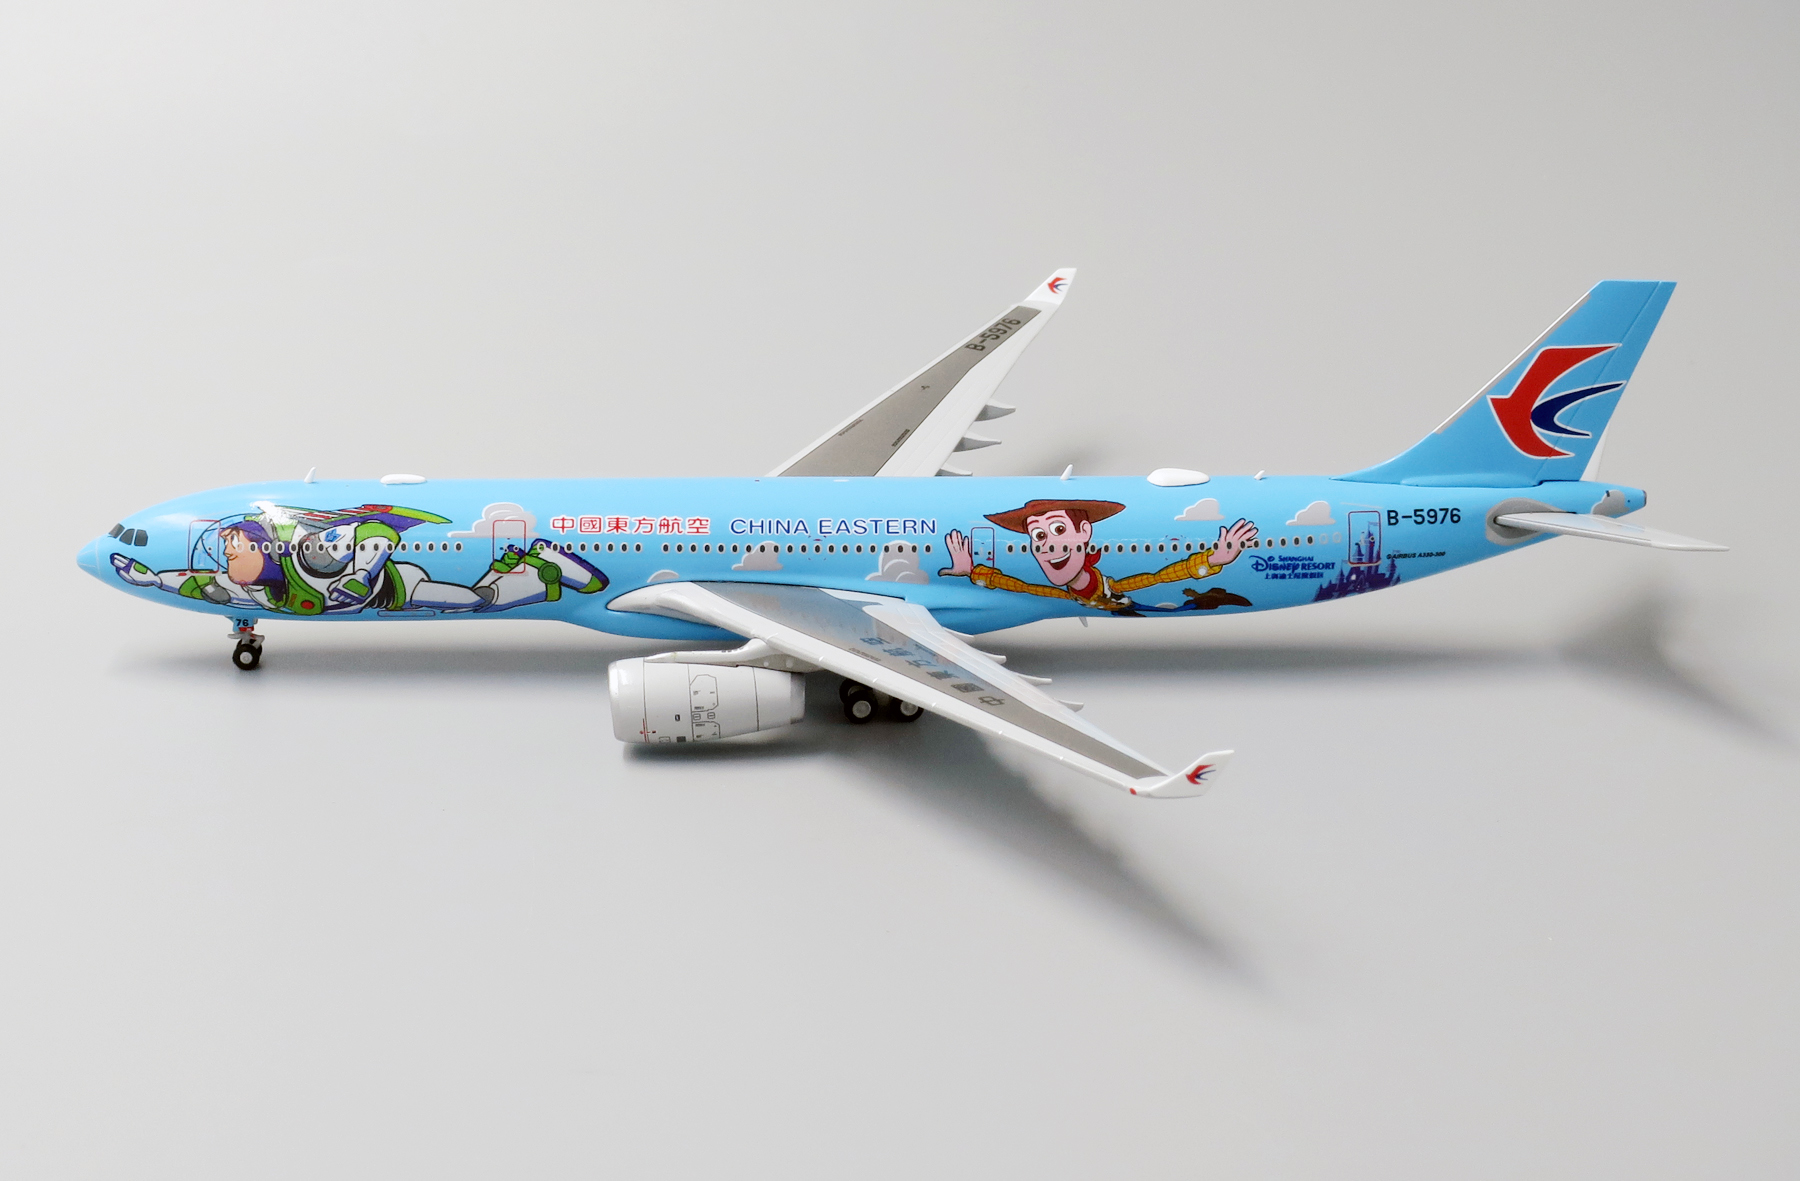 Details about   1:400 Phoenix CHINA EASTERN AIRBUS A330-300 Passenger Airplane Diecast Model